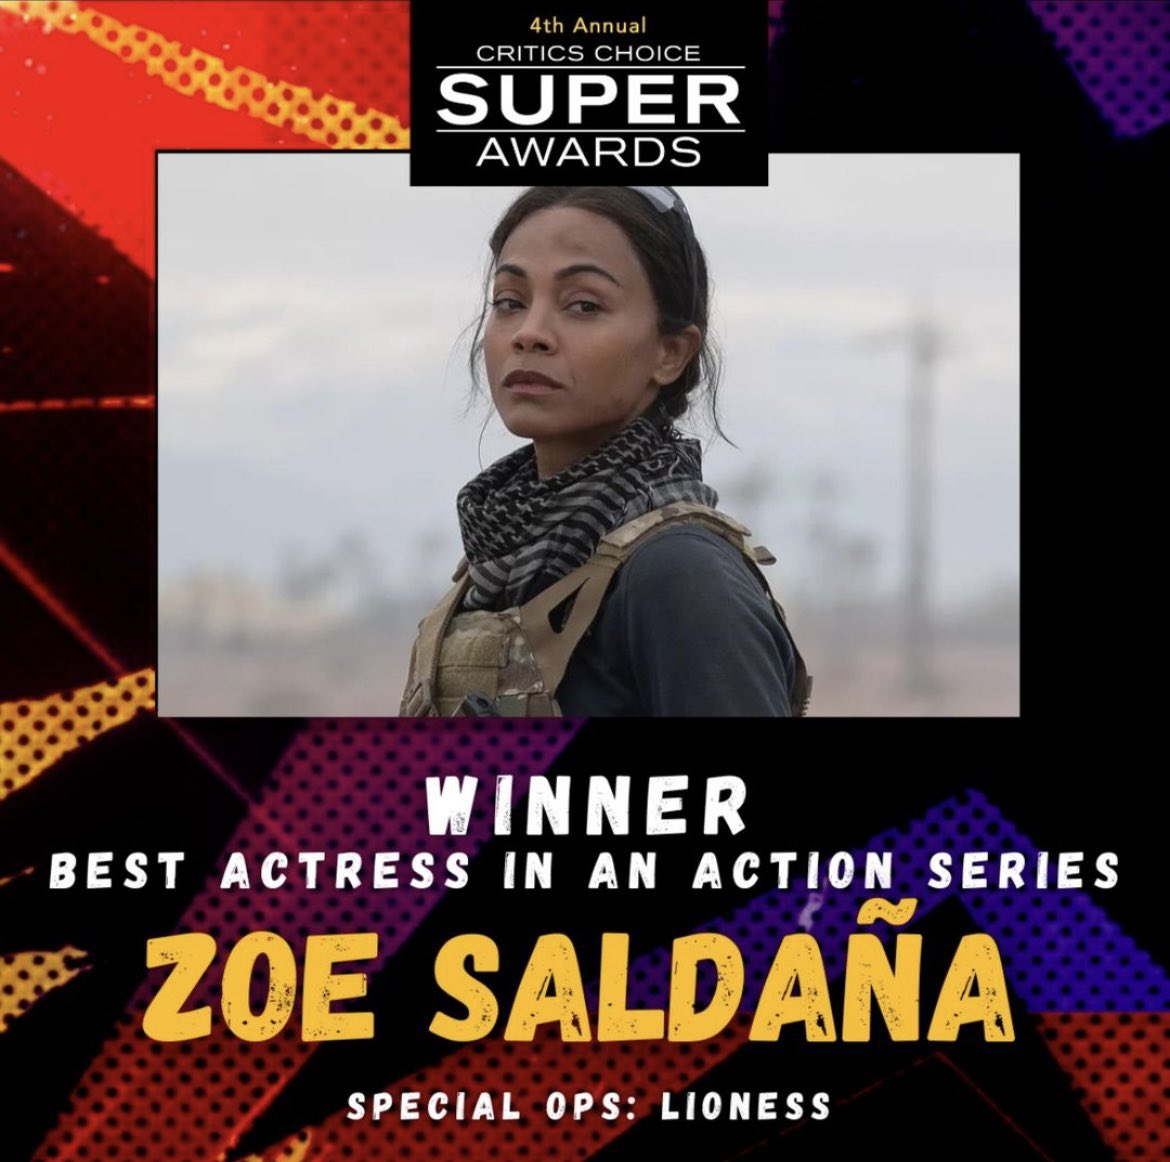 Congratulations Zoe! Critics Choice Super Awards Winner for Best Actress in an Action Series for her role as Joe in Special Ops: Lioness! ❤️ #zoesaldana #specialopslioness